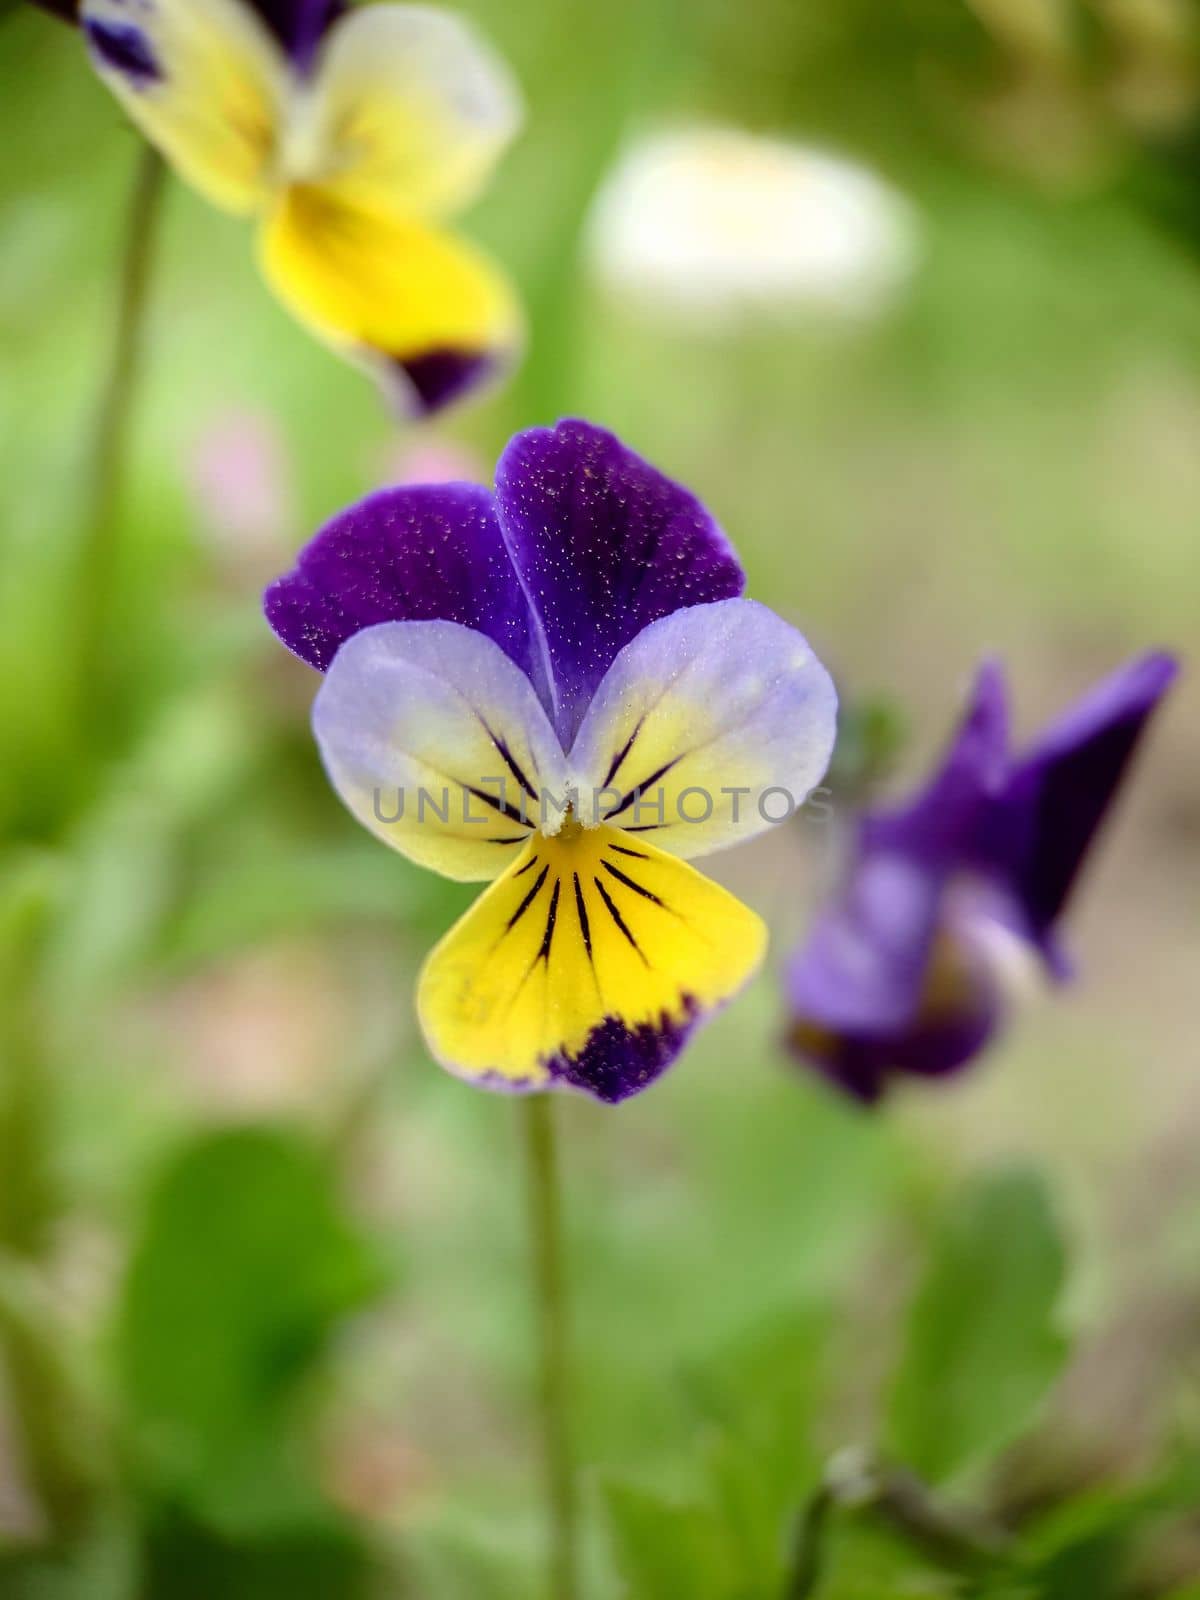 A blooming violet flower in the open air close-up.Macrophotography.Texture or background.